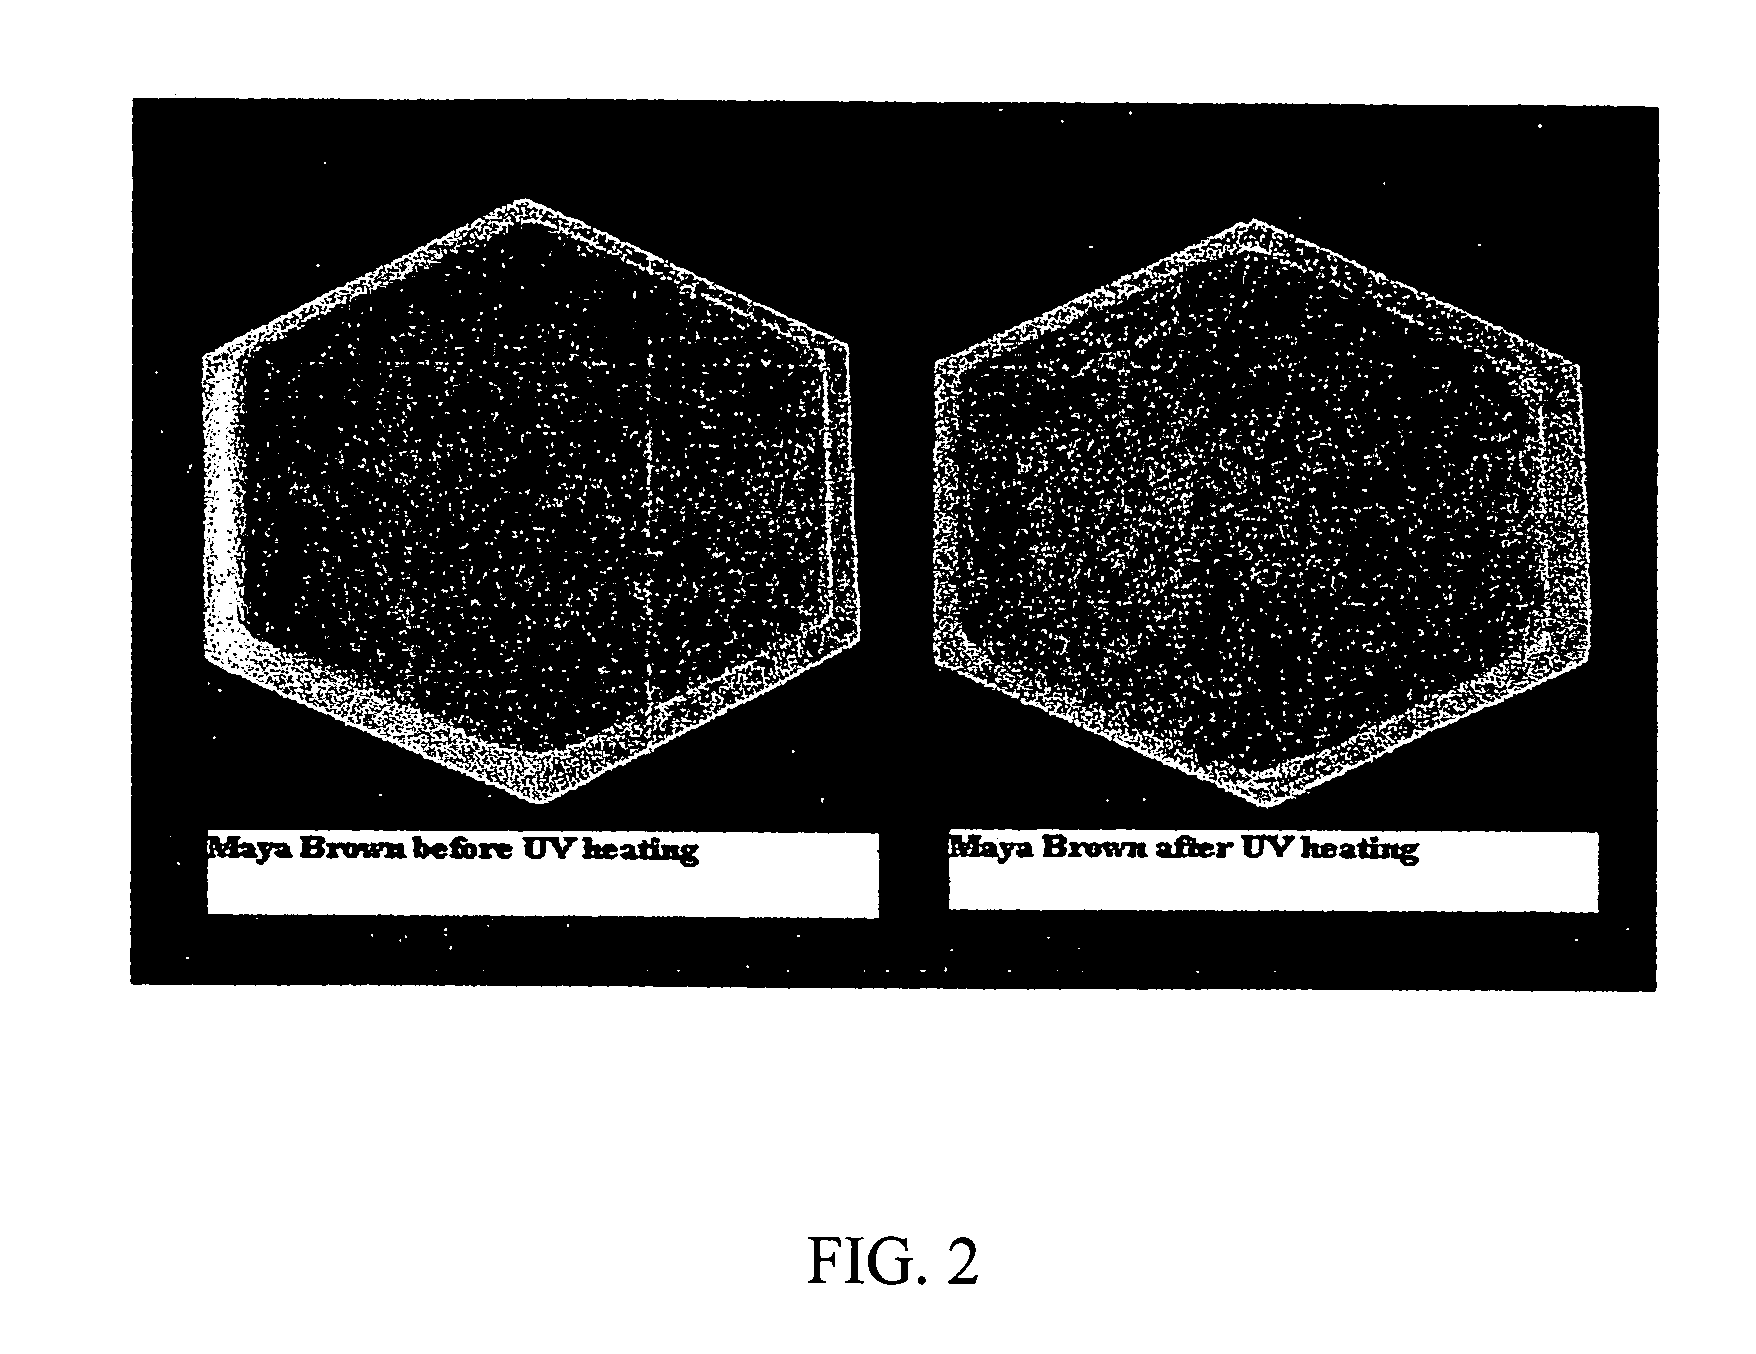 Color compositions and methods of manufacture